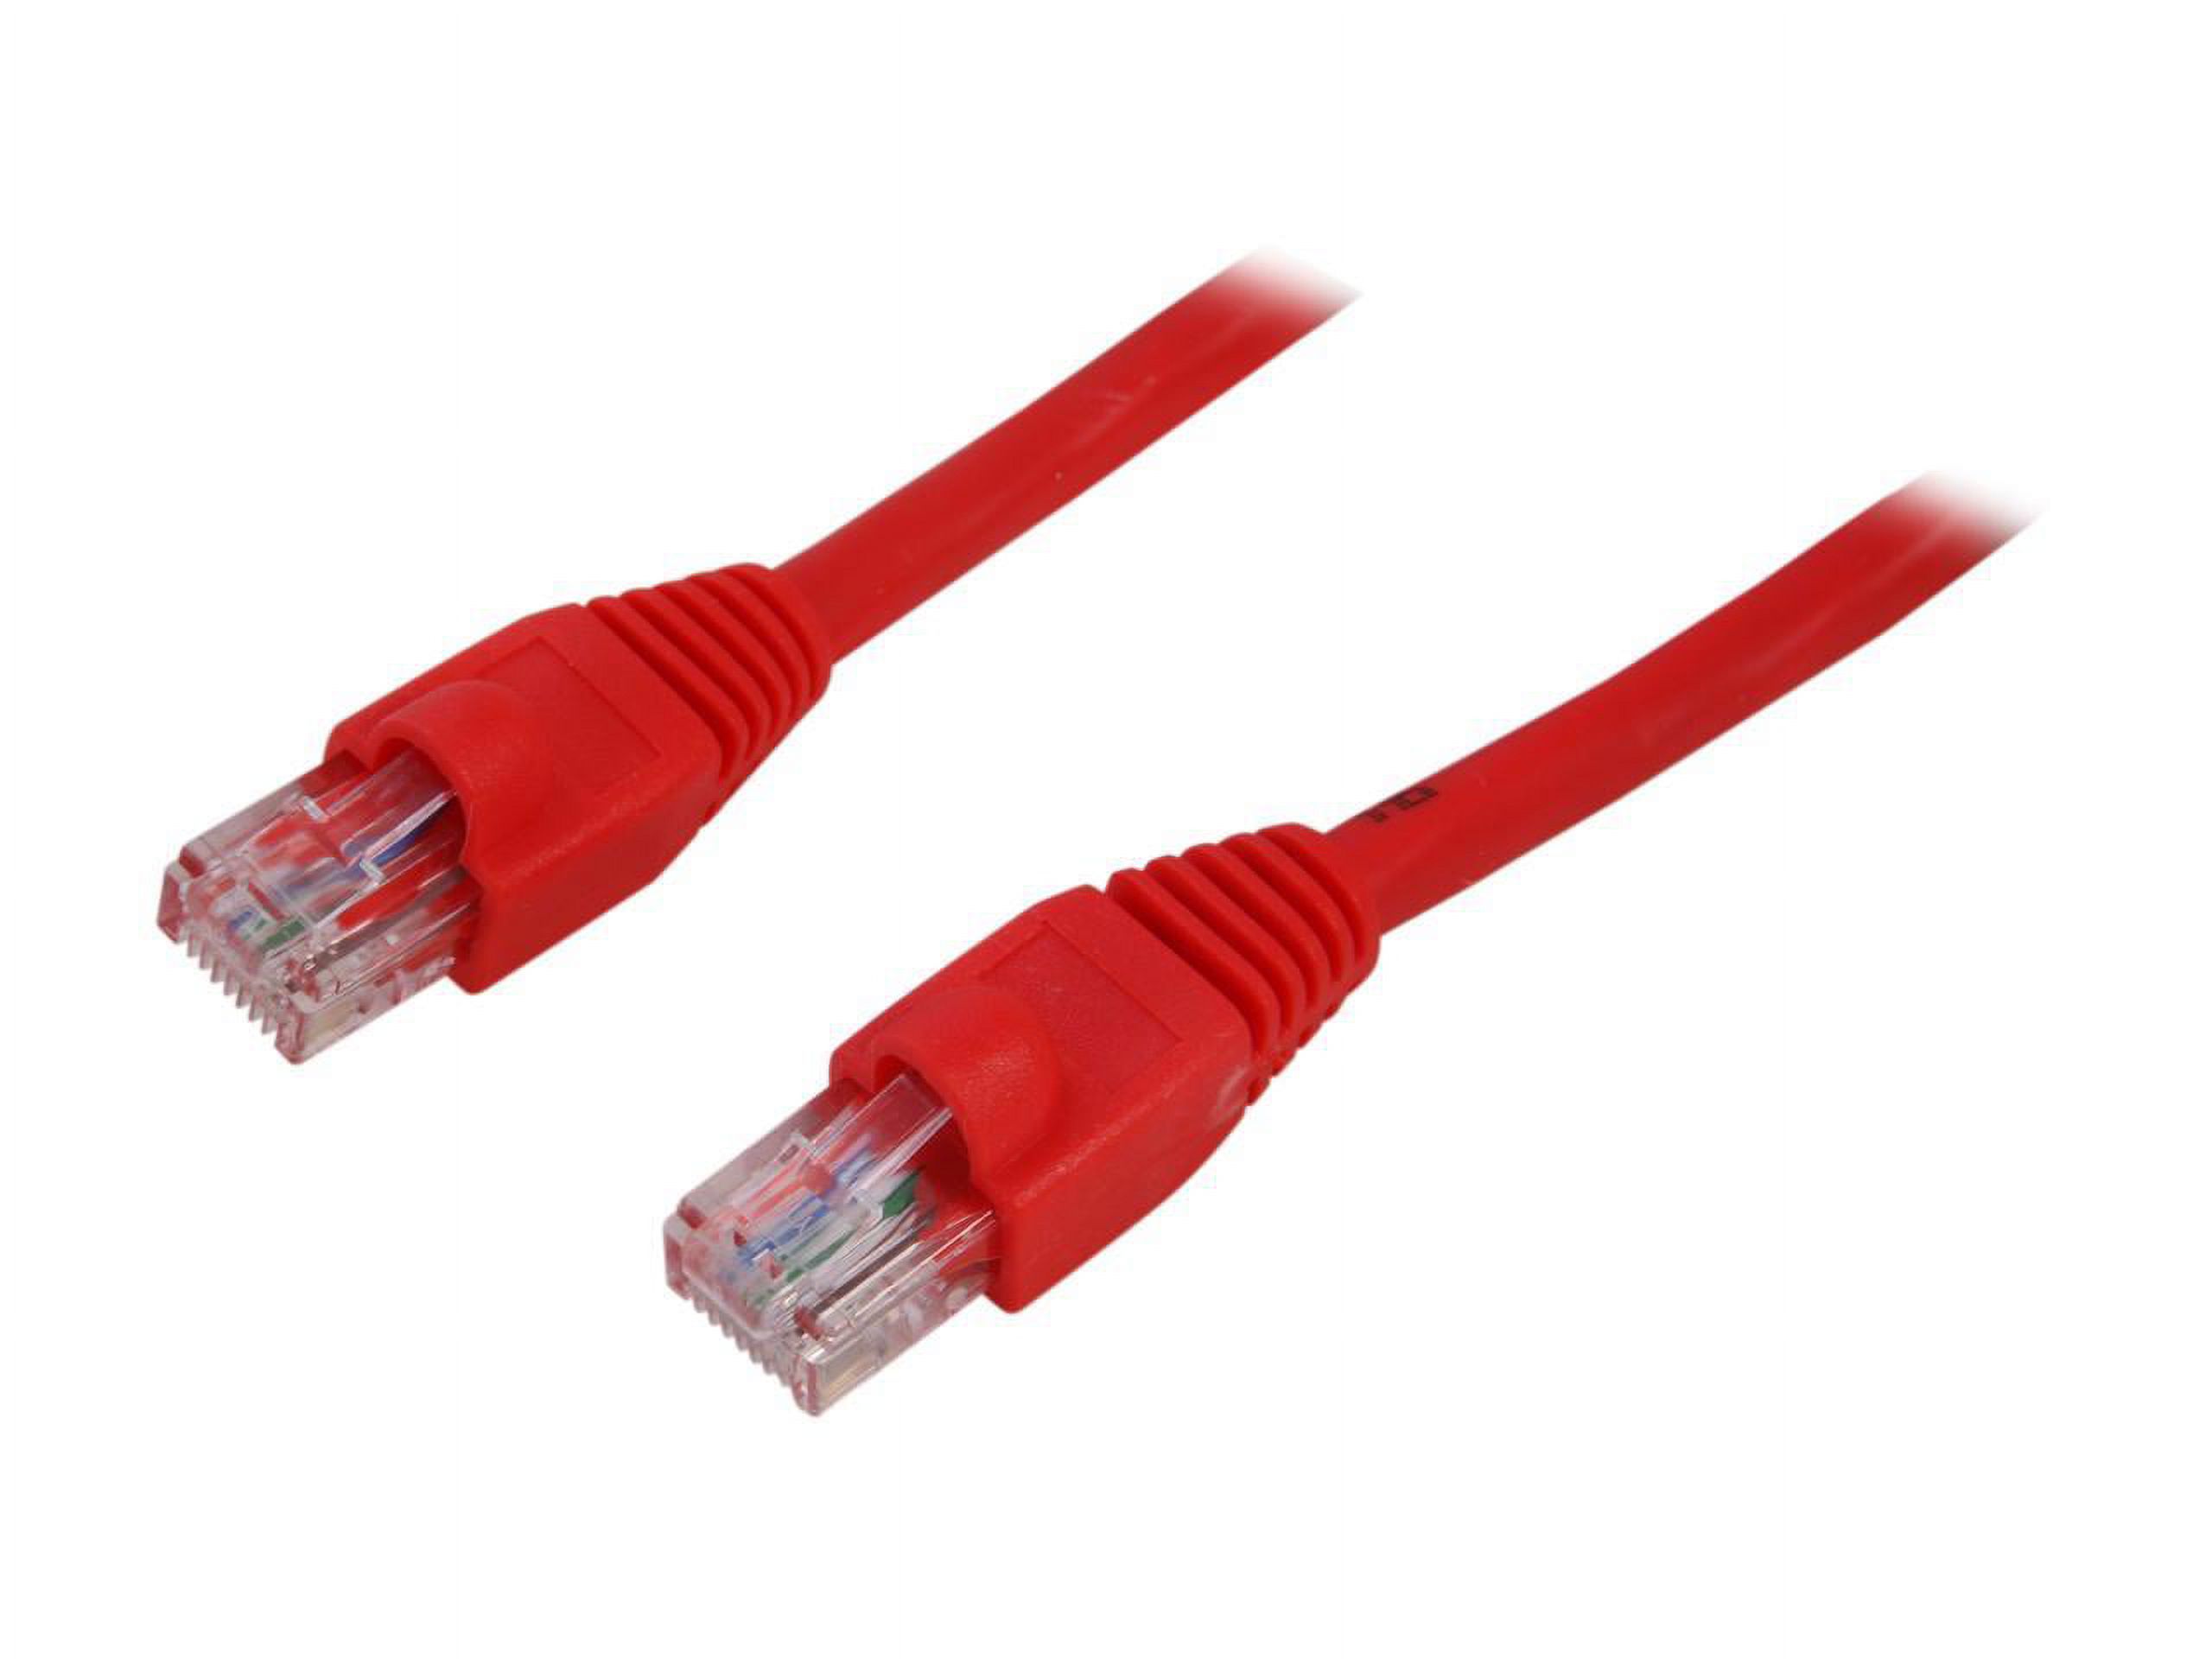 Link Depot C6M-14-RDB 14 ft. Cat 6 Red Network Cable - image 1 of 3